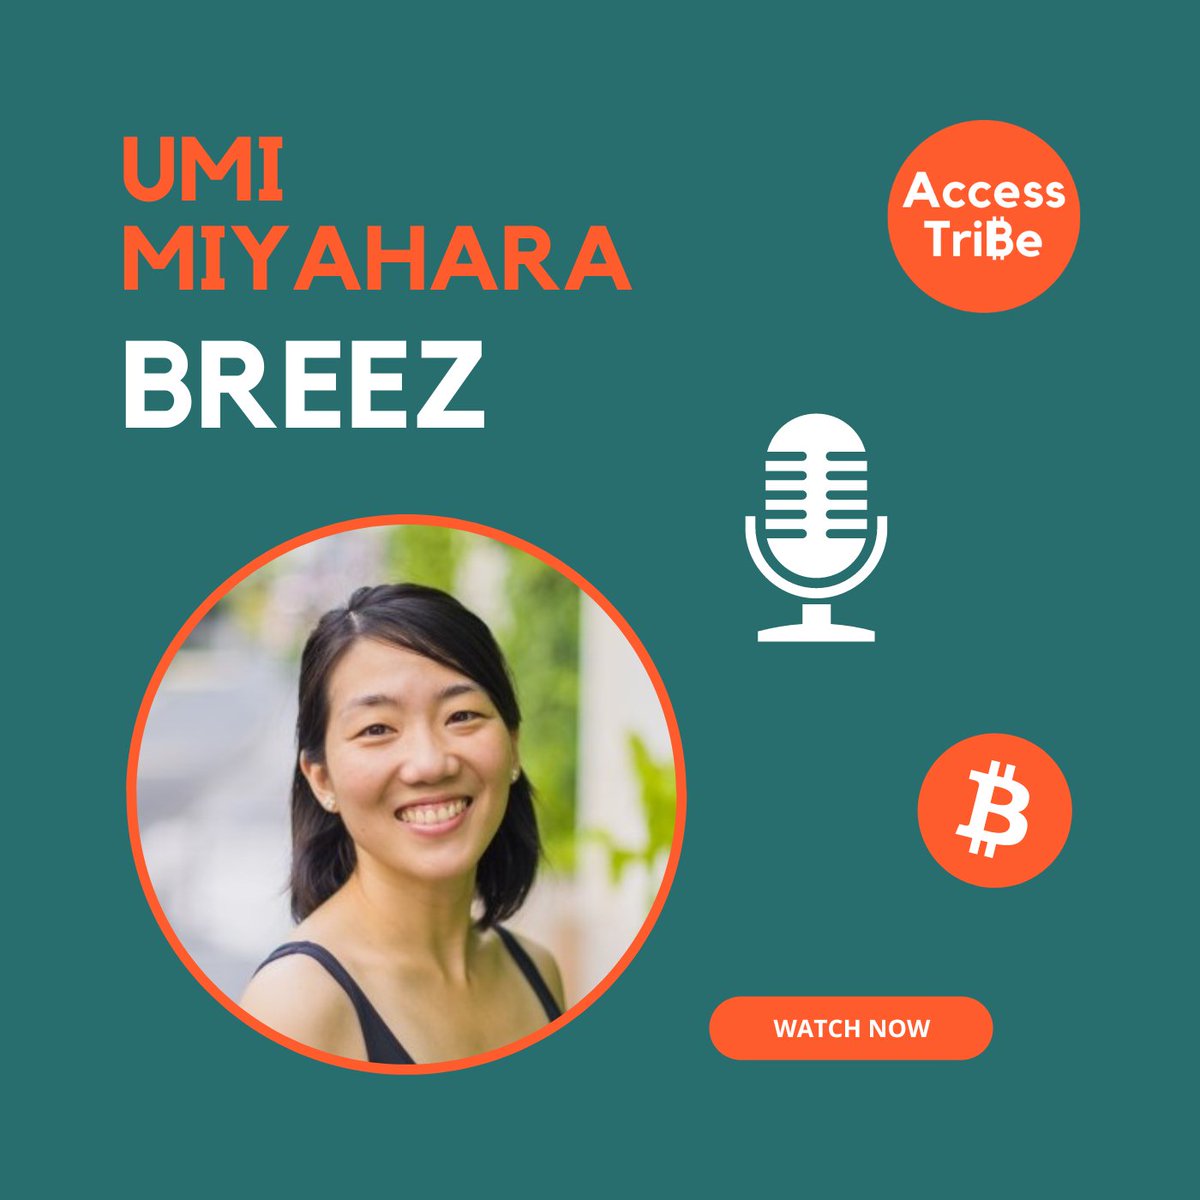 AT50 - @MiyaharaUmi, @Breez_Tech 📽️ & 🎧 with links on our website! 𝗪𝗲 𝘁𝗮𝗹𝗸𝗲𝗱 𝗮𝗯𝗼𝘂𝘁: ✅ Getting lost in the Sahara Desert ✅ Surviving an earthquake in Japan ✅ The journey from TradFi to Bitcoin